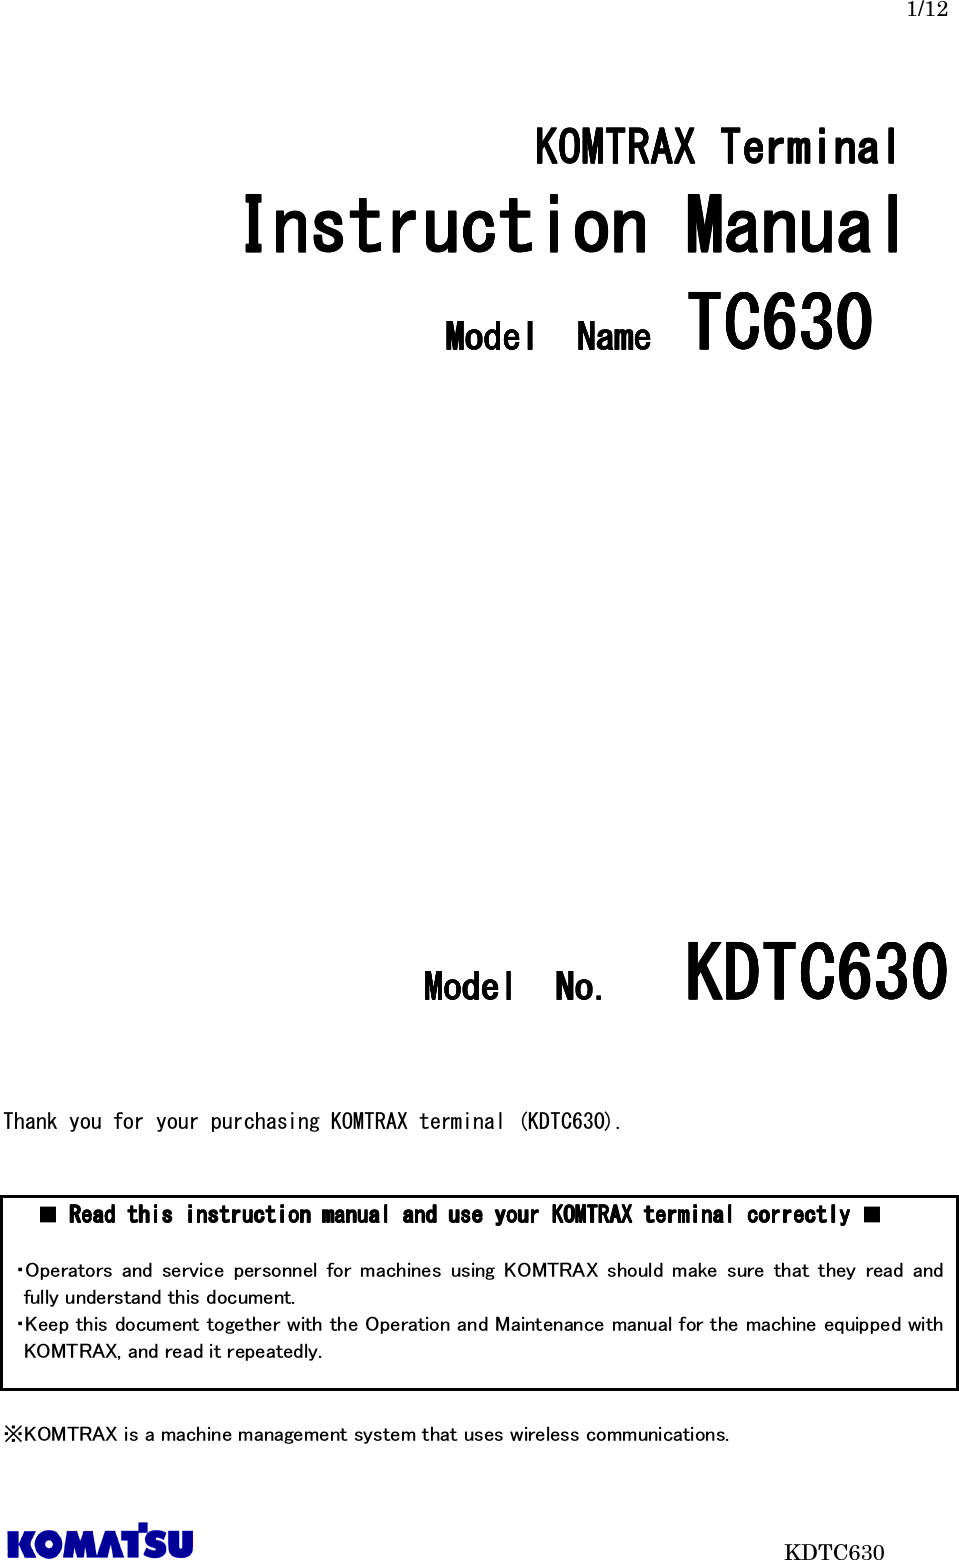   1/12                           KDTC630  KOMTRAX Terminal  KOMTRAX Terminal  KOMTRAX Terminal  KOMTRAX Terminal      Instruction Manual Instruction Manual Instruction Manual Instruction Manual     ModelModelModelModel     NameNameNameName    TC6TC6TC6TC630303030                             ModelModelModelModel     NoNoNoNo．．．．     KDTC6KDTC6KDTC6KDTC630303030       Thank you for your purchasing KOMTRAX terminal (KDTC630).           ※KOMTRAX is a machine management system that uses wireless communications. ■ Read this instruction manual and Read this instruction manual and Read this instruction manual and Read this instruction manual and use your KOMTRAX terminal correctlyuse your KOMTRAX terminal correctlyuse your KOMTRAX terminal correctlyuse your KOMTRAX terminal correctly ■  ・Operators  and  service  personnel  for  machines  using  KOMTRAX  should  make  sure  that  they  read  and fully understand this document.   ・Keep this document together with the Operation and Maintenance manual for the machine equipped with KOMTRAX, and read it repeatedly.  